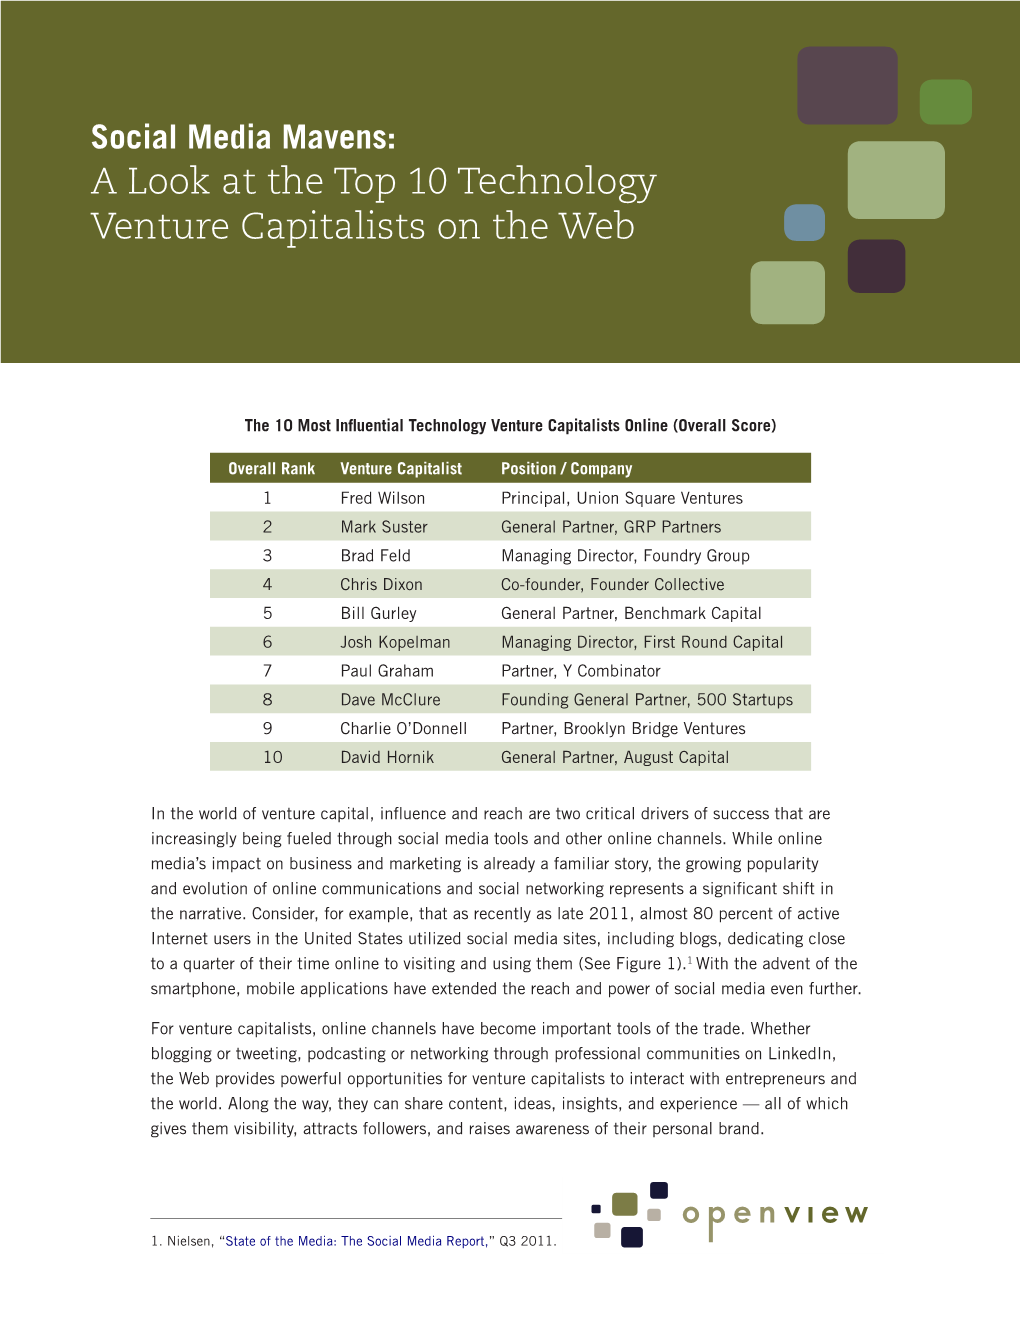 A Look at the Top 10 Technology Venture Capitalists on the Web